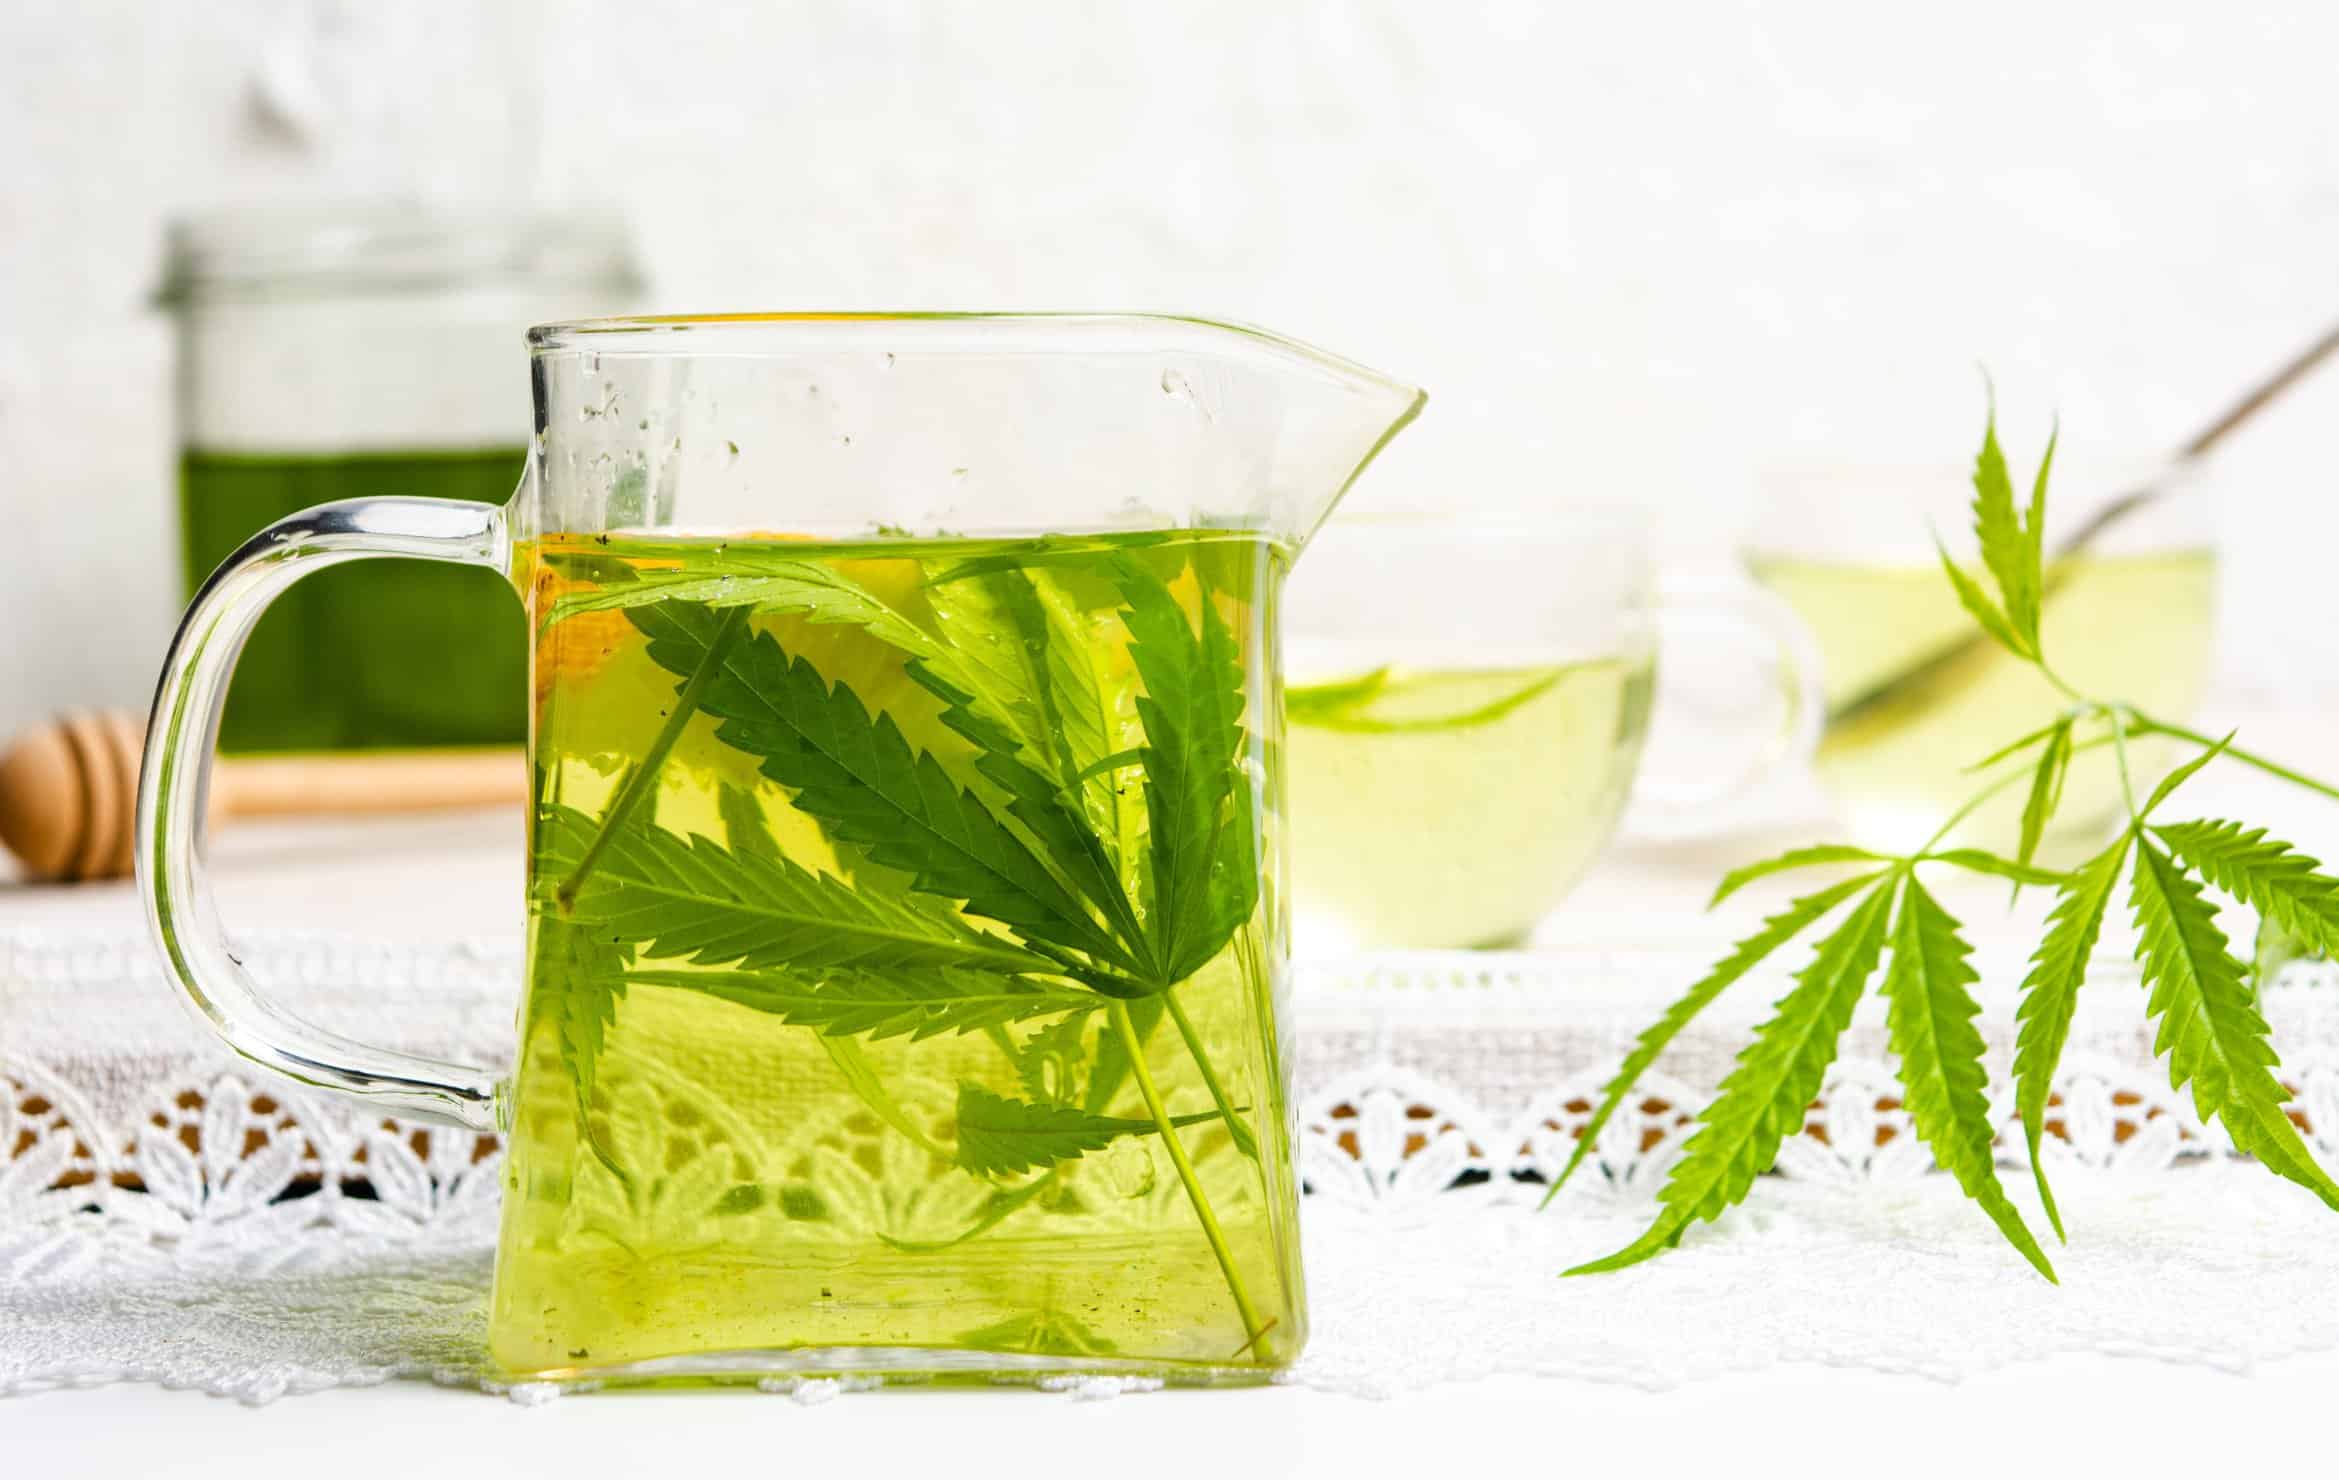 How Marijuana & Other Healthy Herbs May Help With Weight Loss